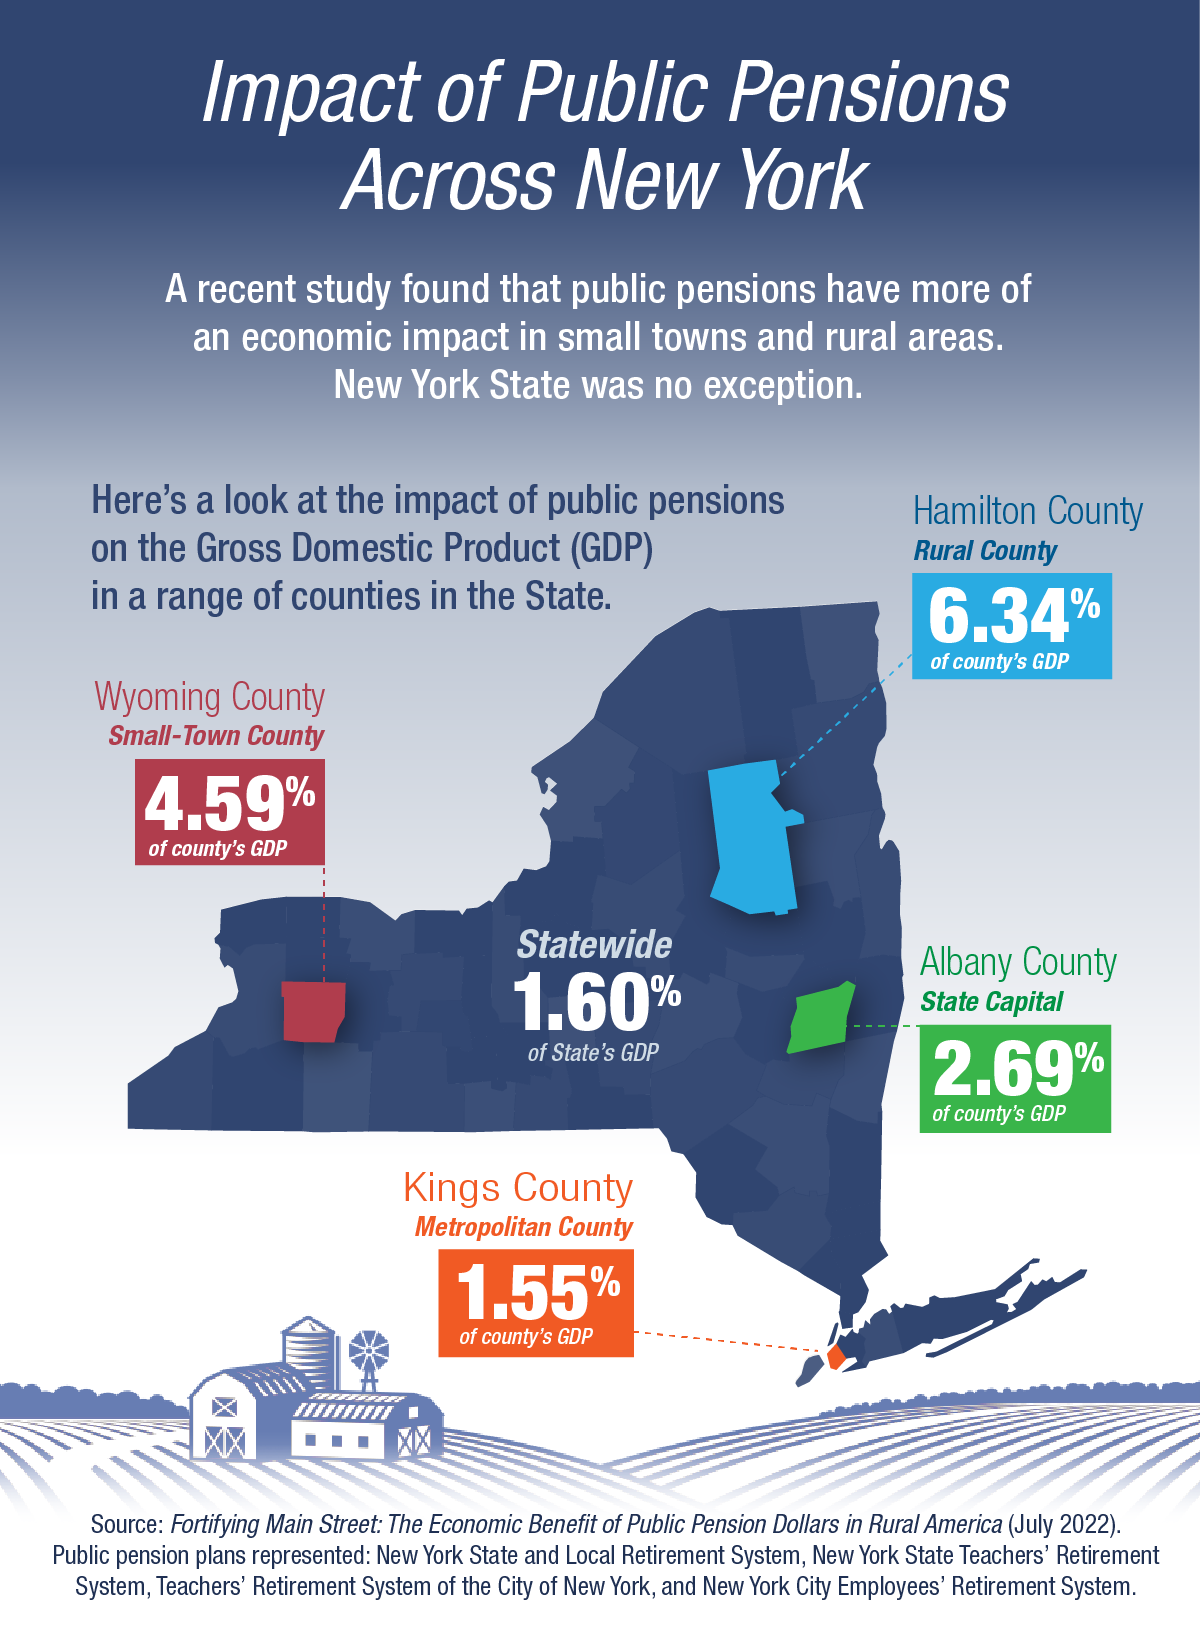 Public Pensions Give Economic Boost to Small Towns and Rural Areas Across New York